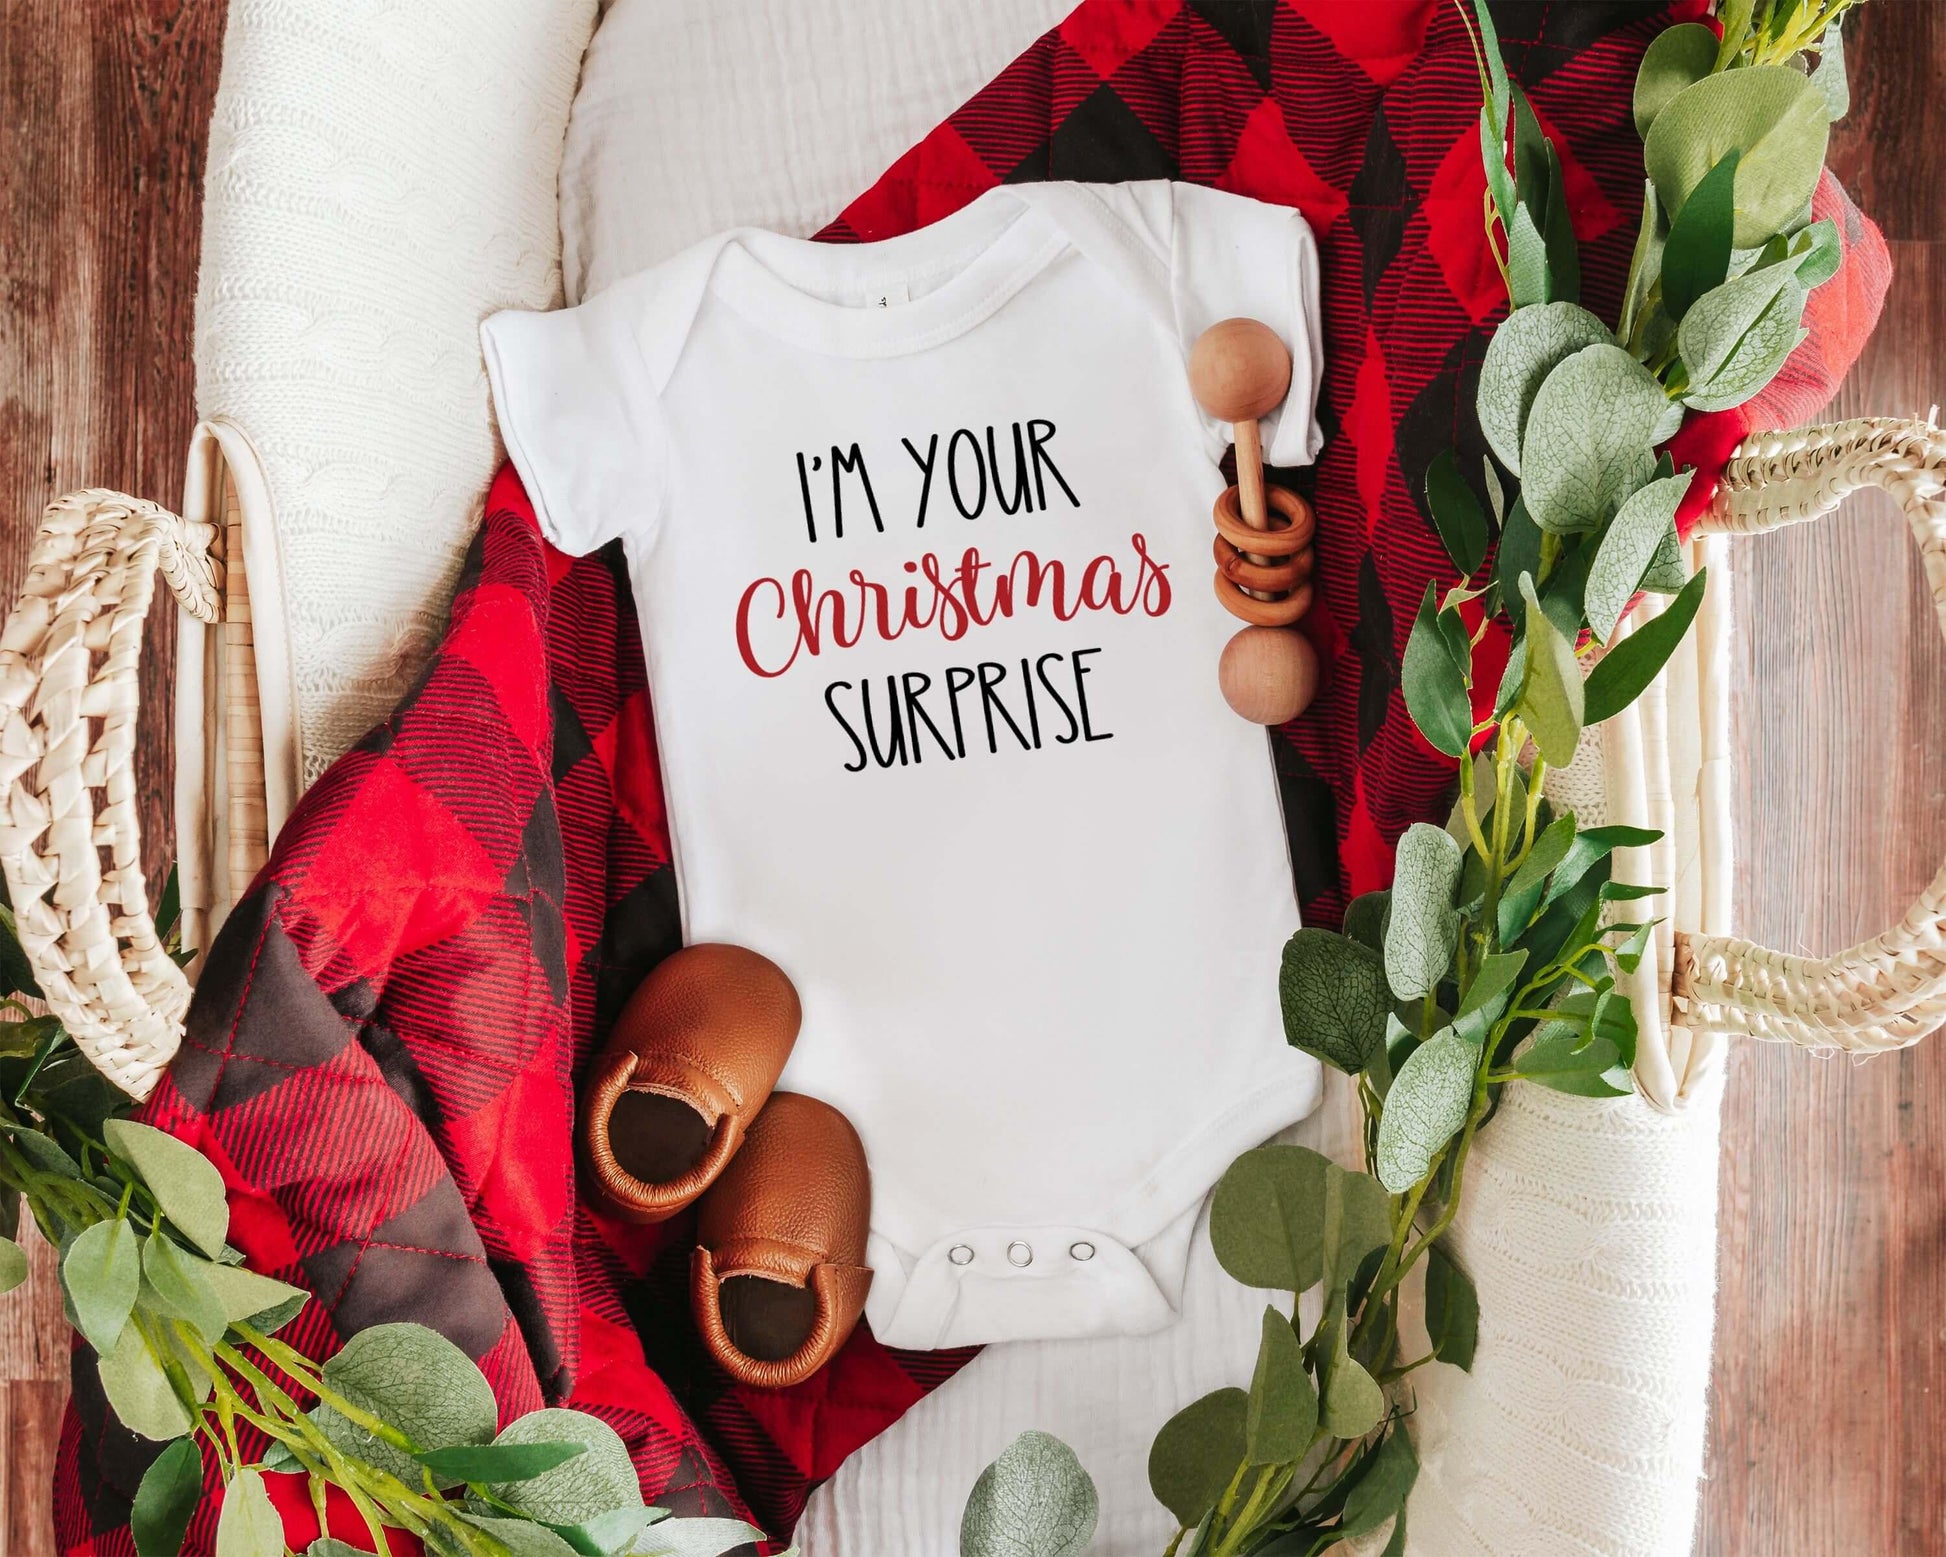 I'm Your Christmas Surprise Onesie - Crystal Rose Design Co.